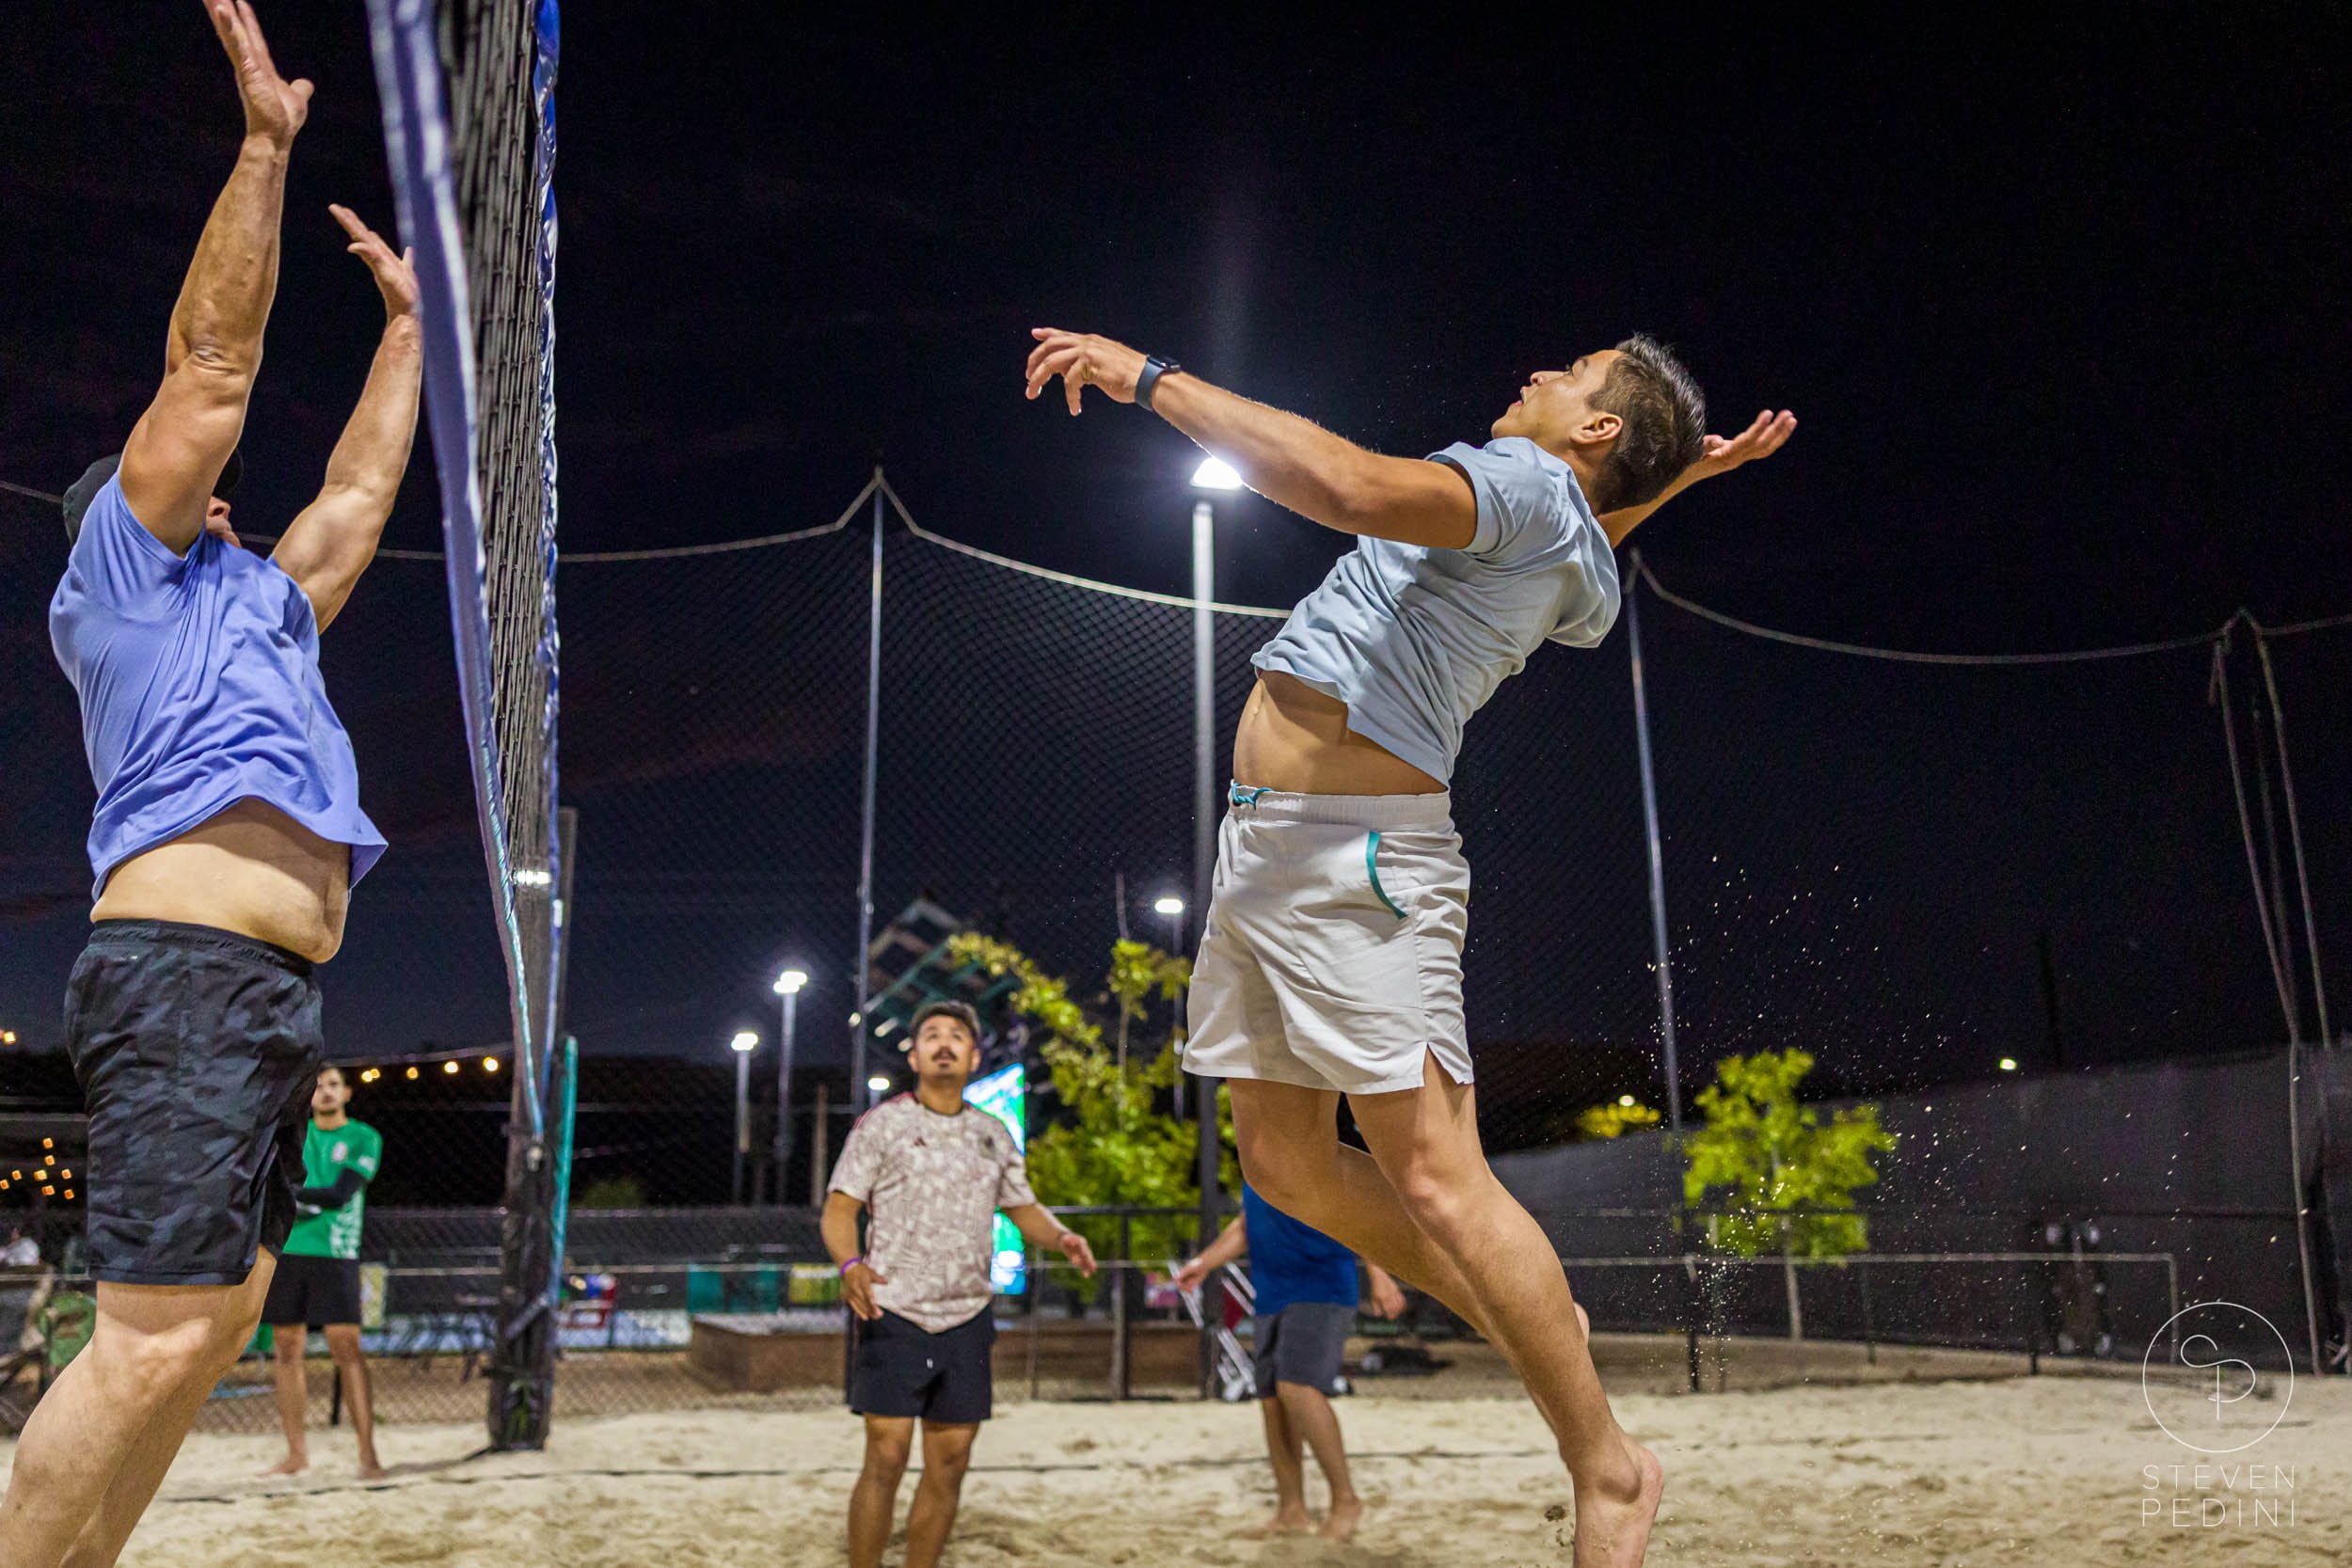 Steven Pedini Photography - Bumpy Pickle - Sand Volleyball - Houston TX - World Cup of Volleyball - 00376.jpg